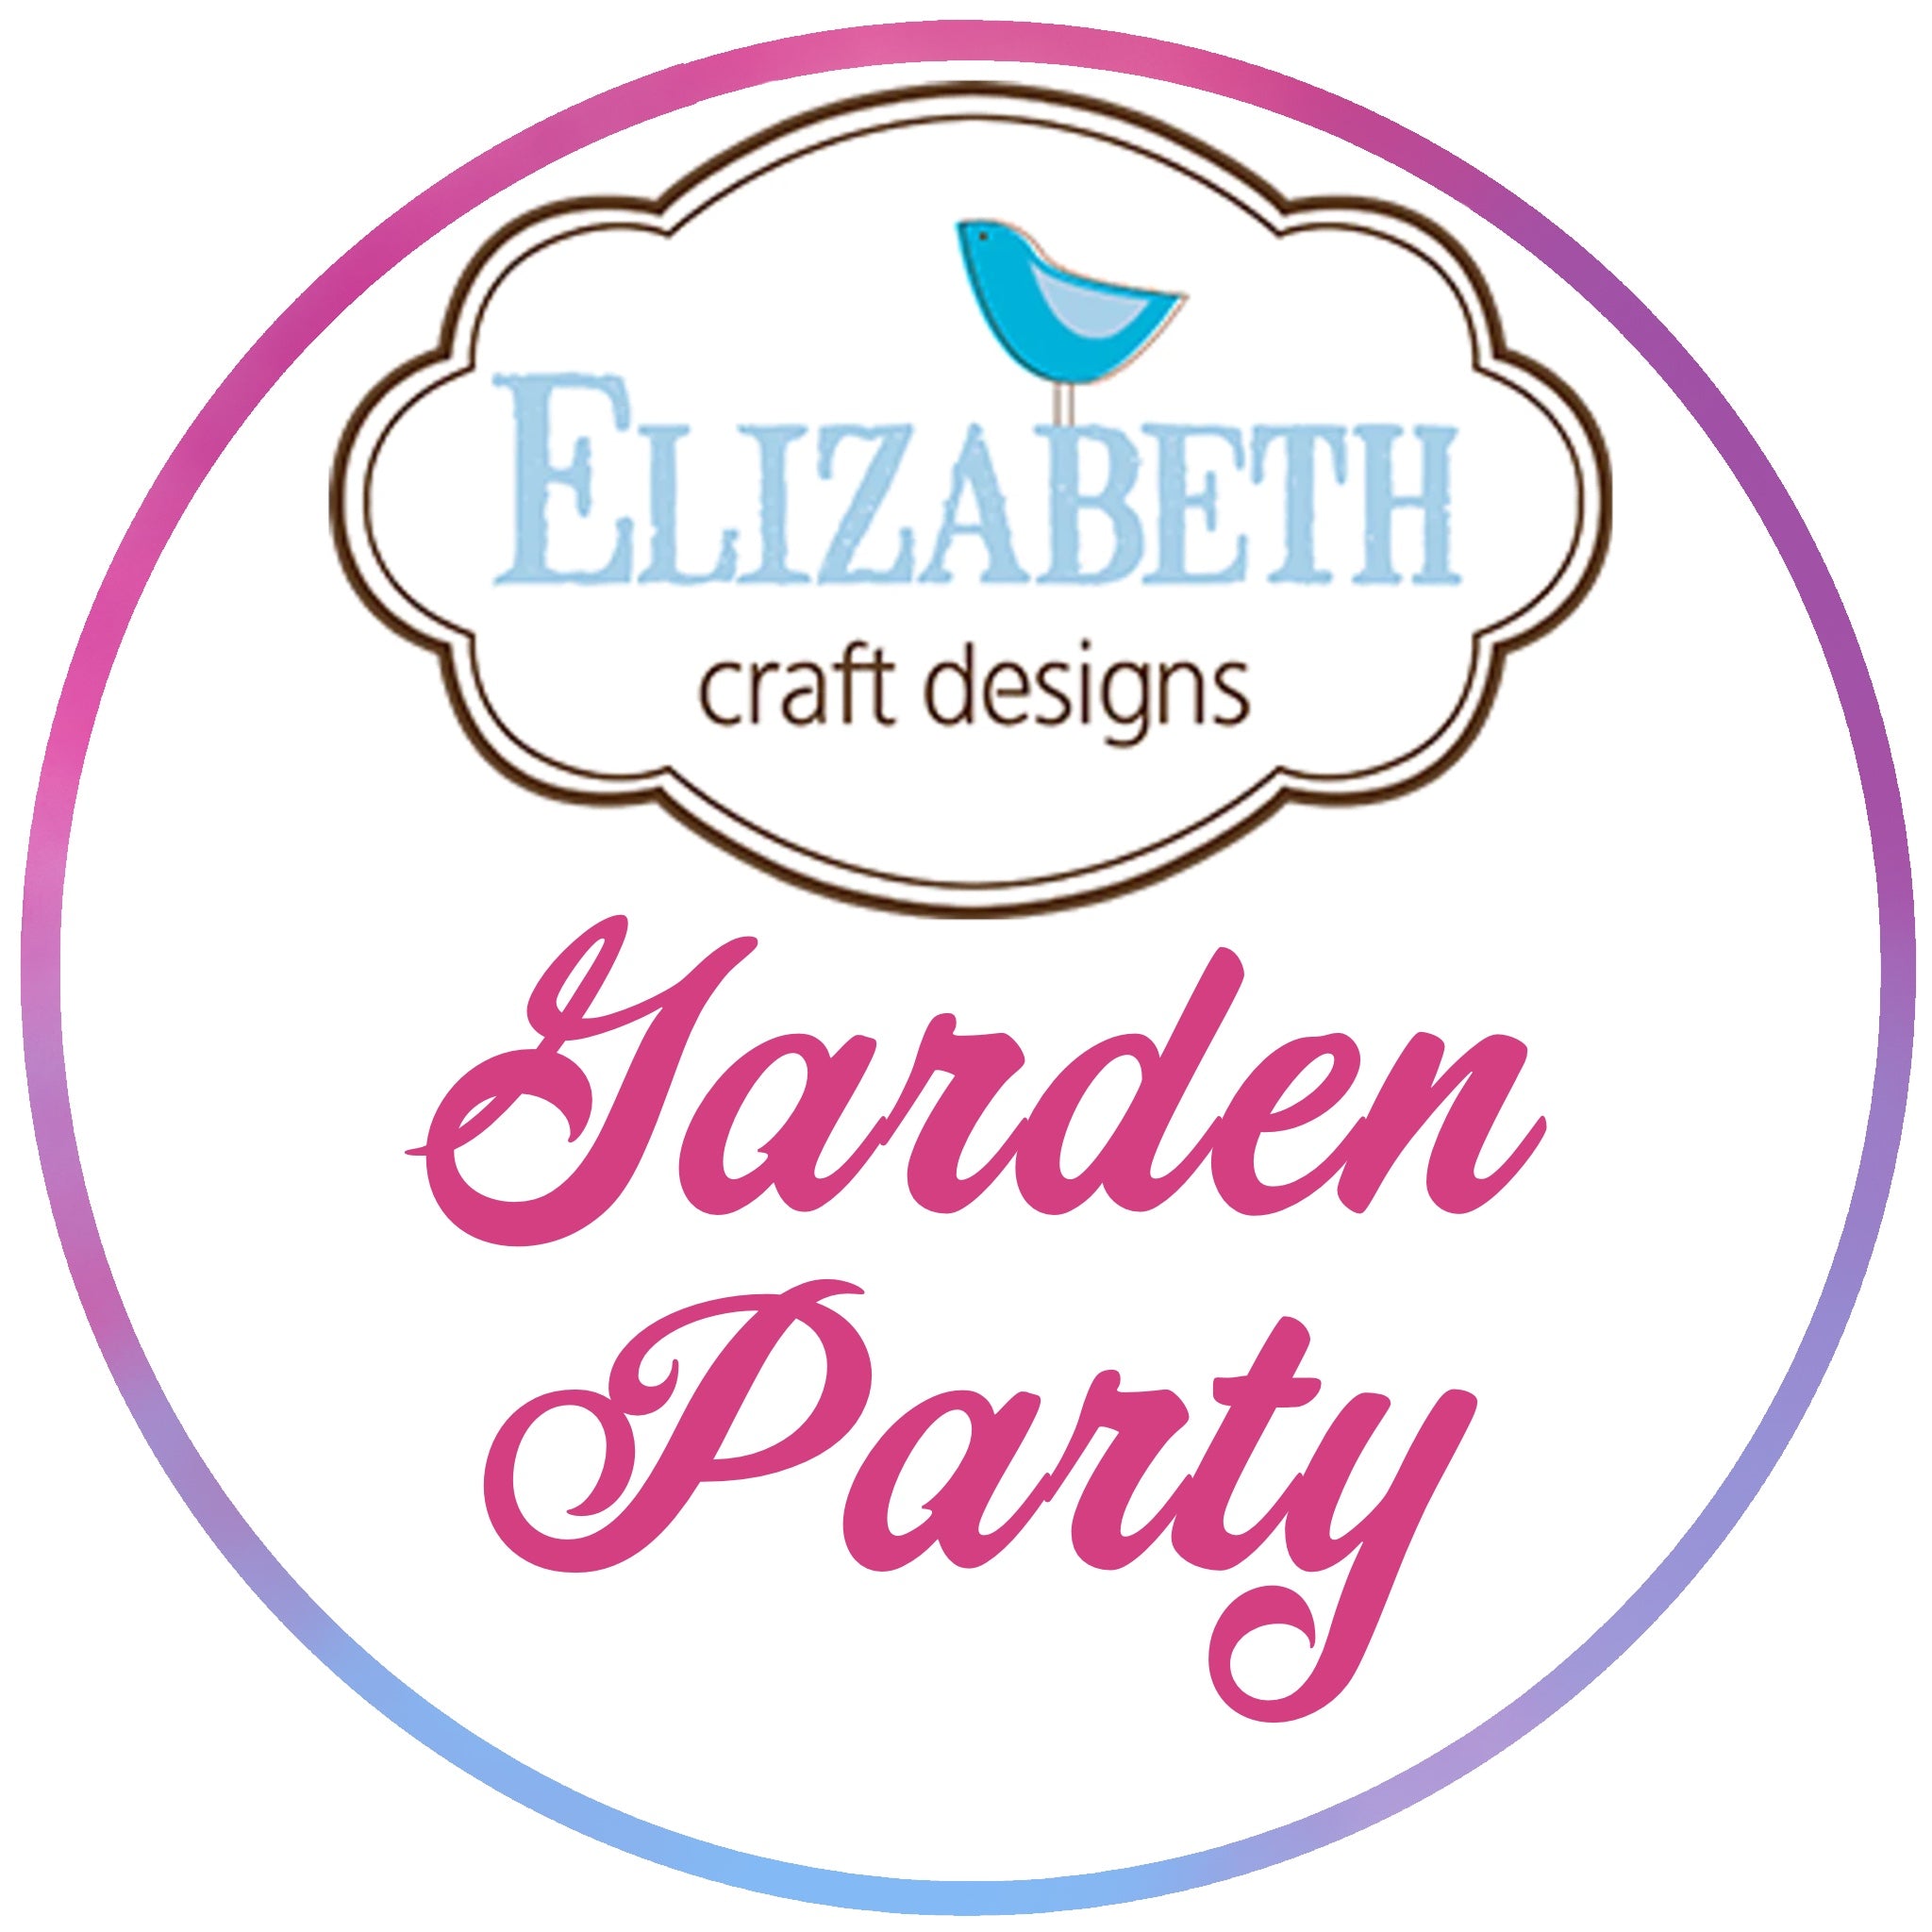 Spellbinders - from The Garden Collection - Stamp and Die Sets - Garden Party